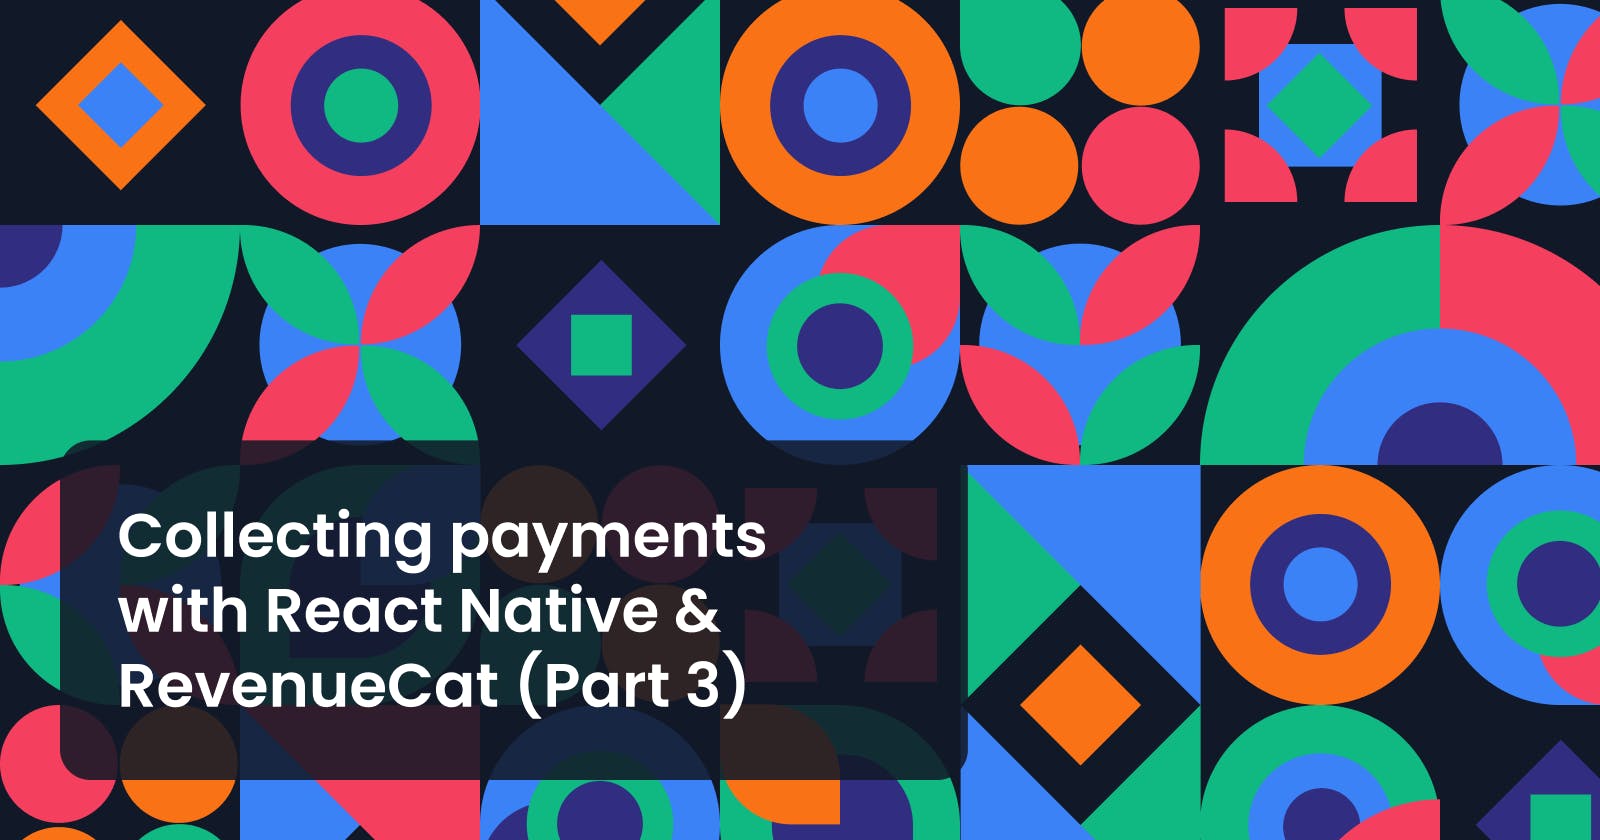 Collecting payments with React Native & RevenueCat (Part 3): Configuring Entitlements & Oferings in RevenueCat